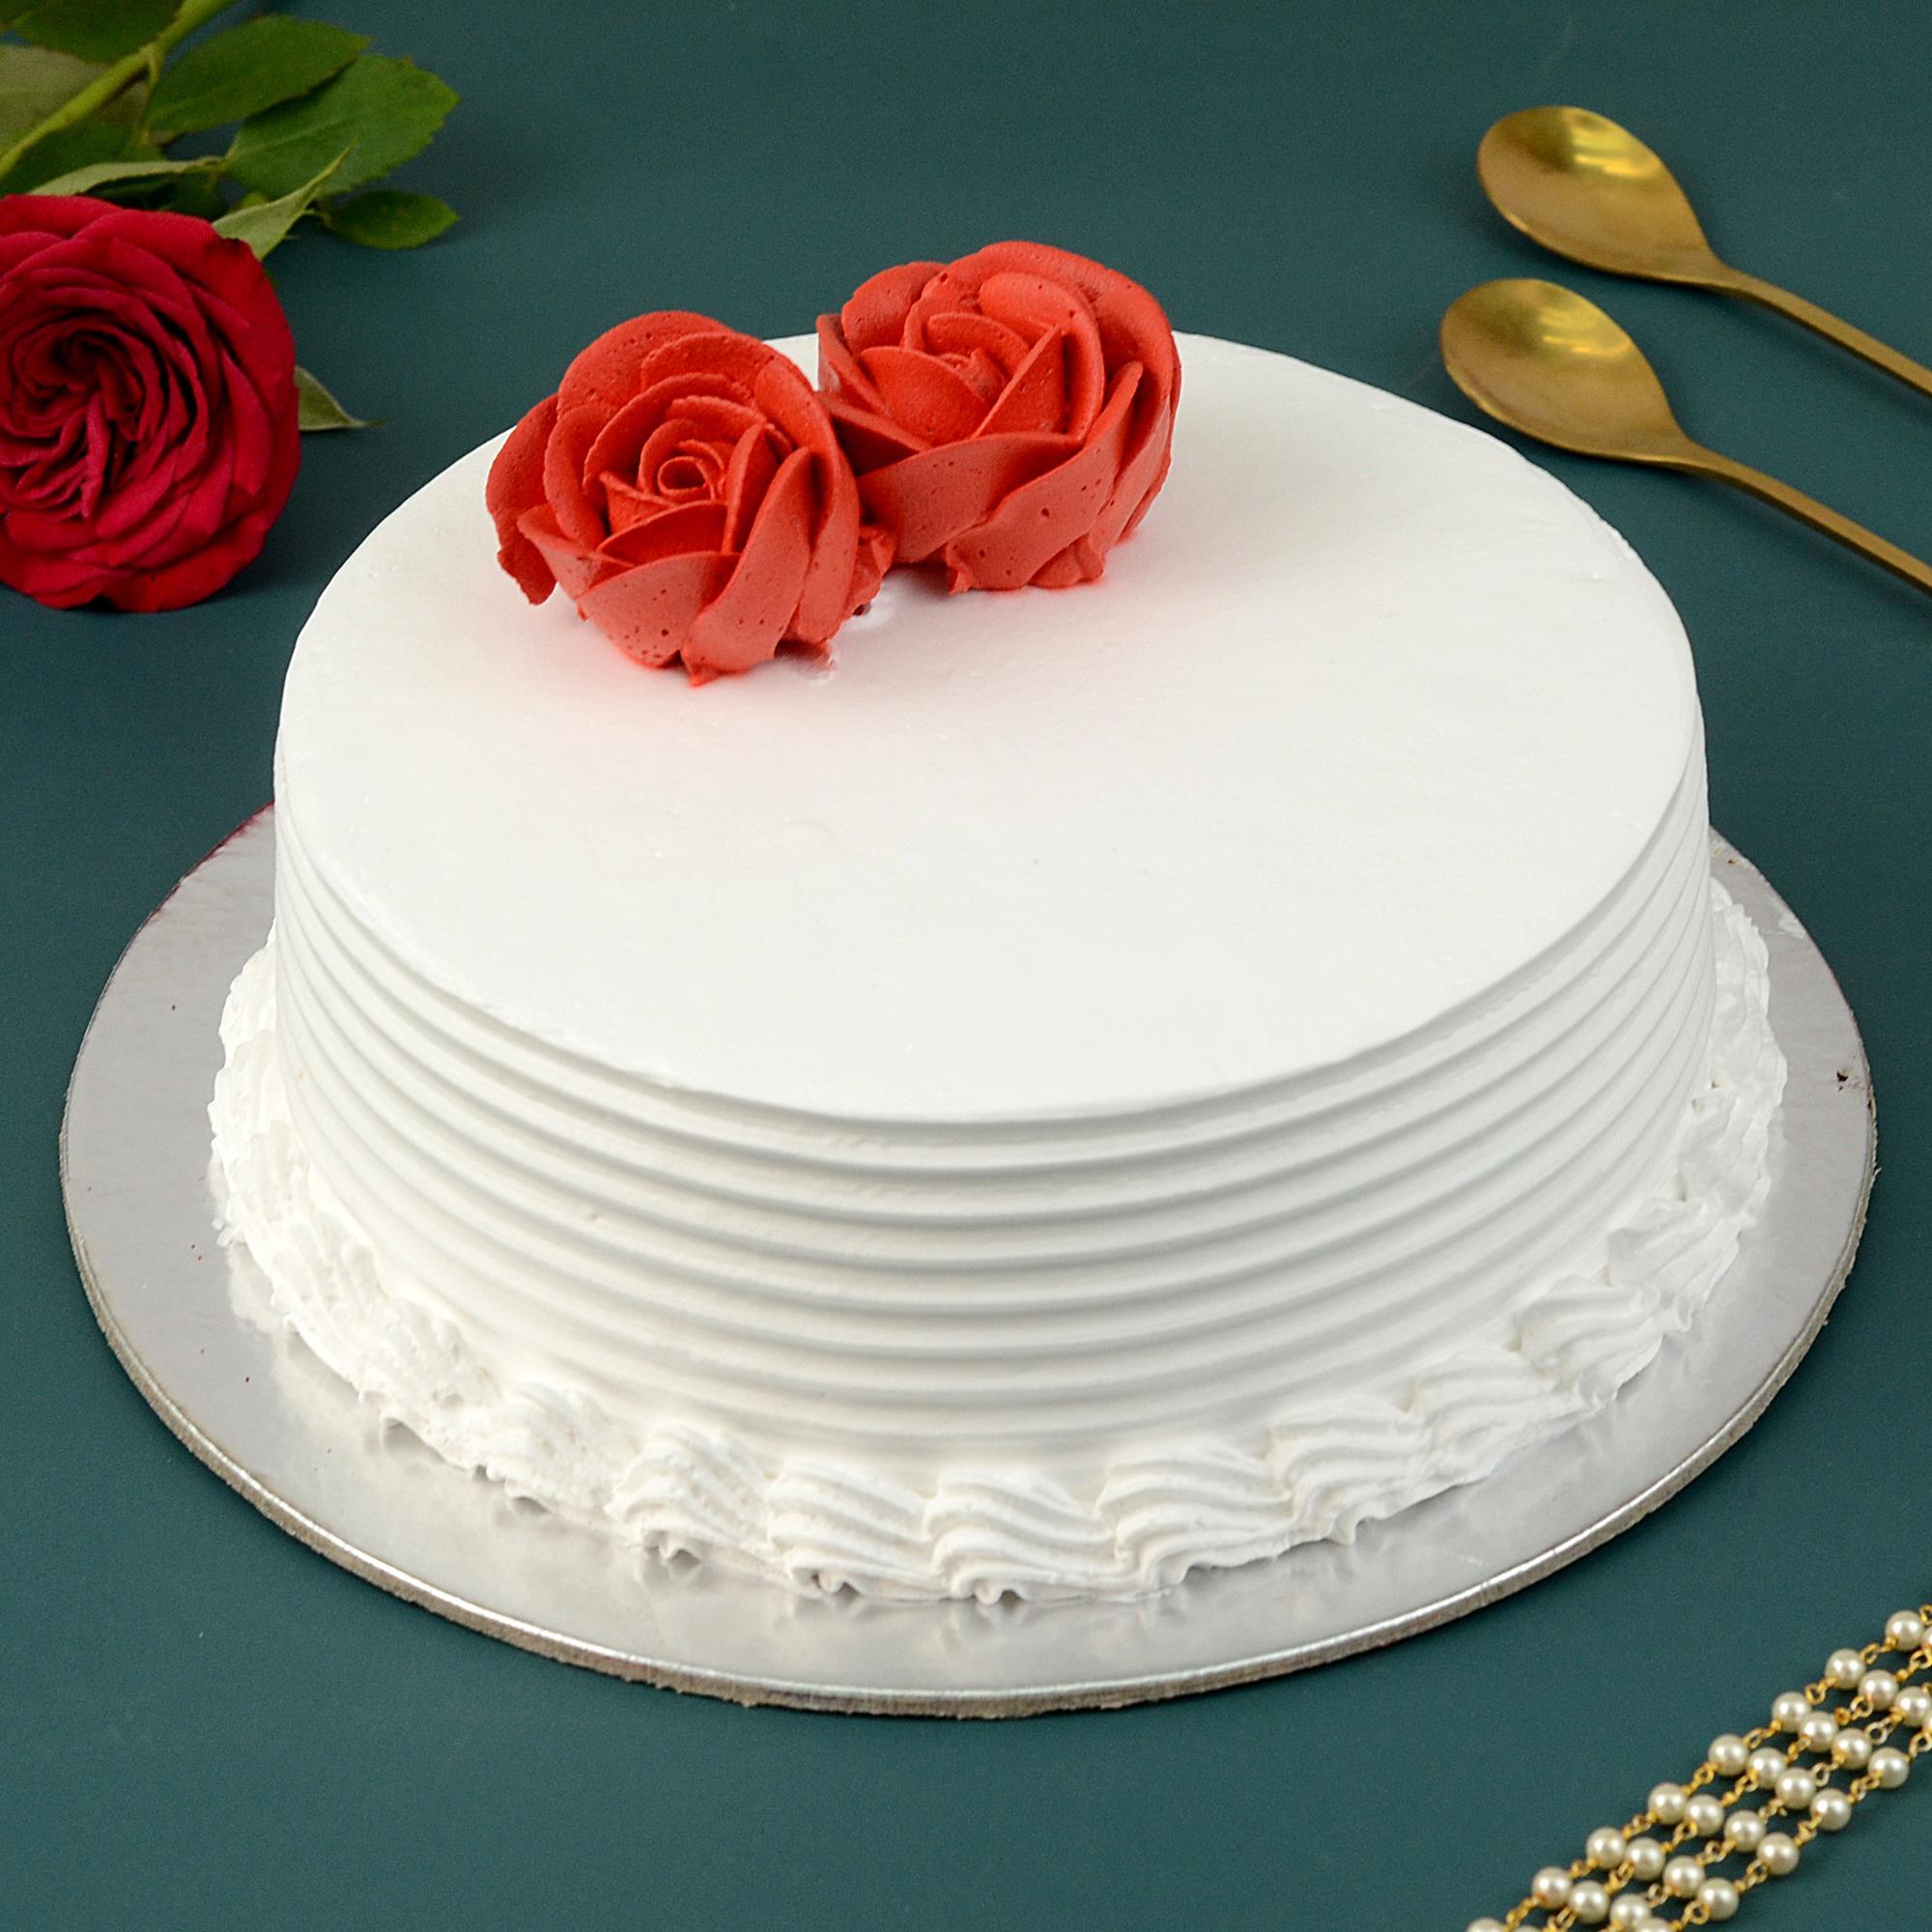 Birthday Cake Delivery in Nagpur | Buy @ INR 399 | Free Delivery